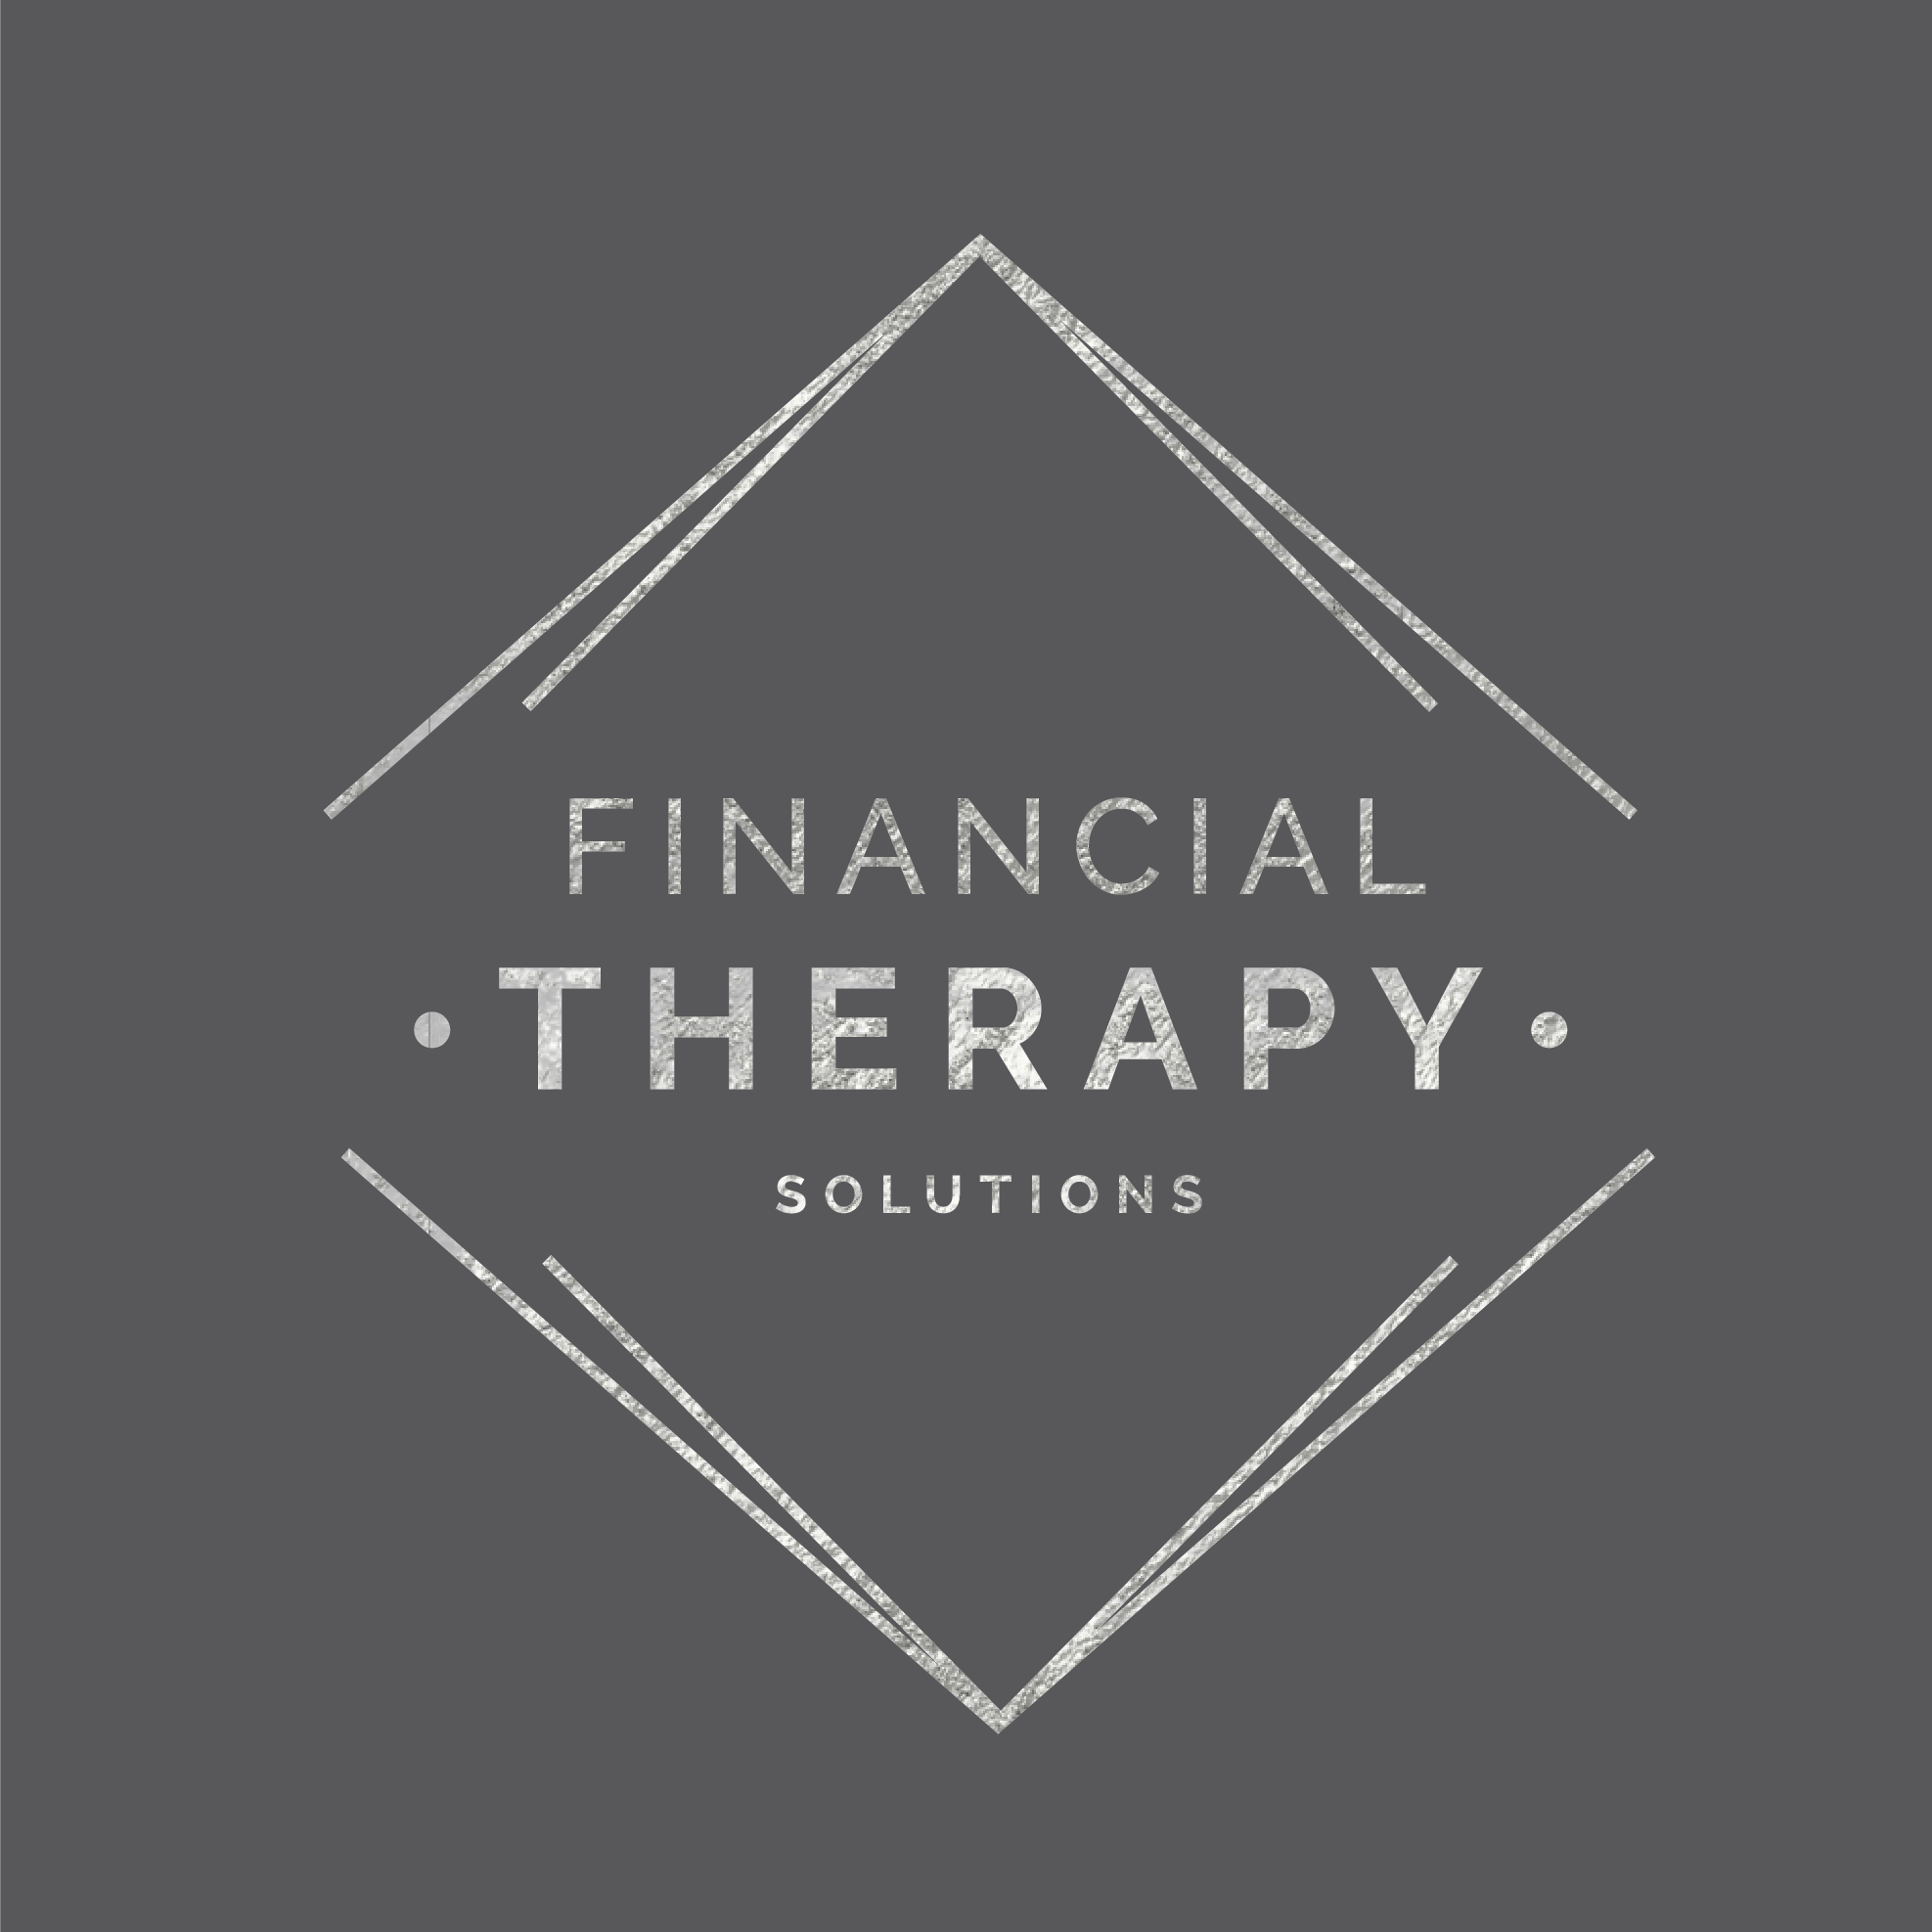 Logo of "Wendy Wright Financial Therapy Solutions" featuring text inside a white diamond outline on a silver background.